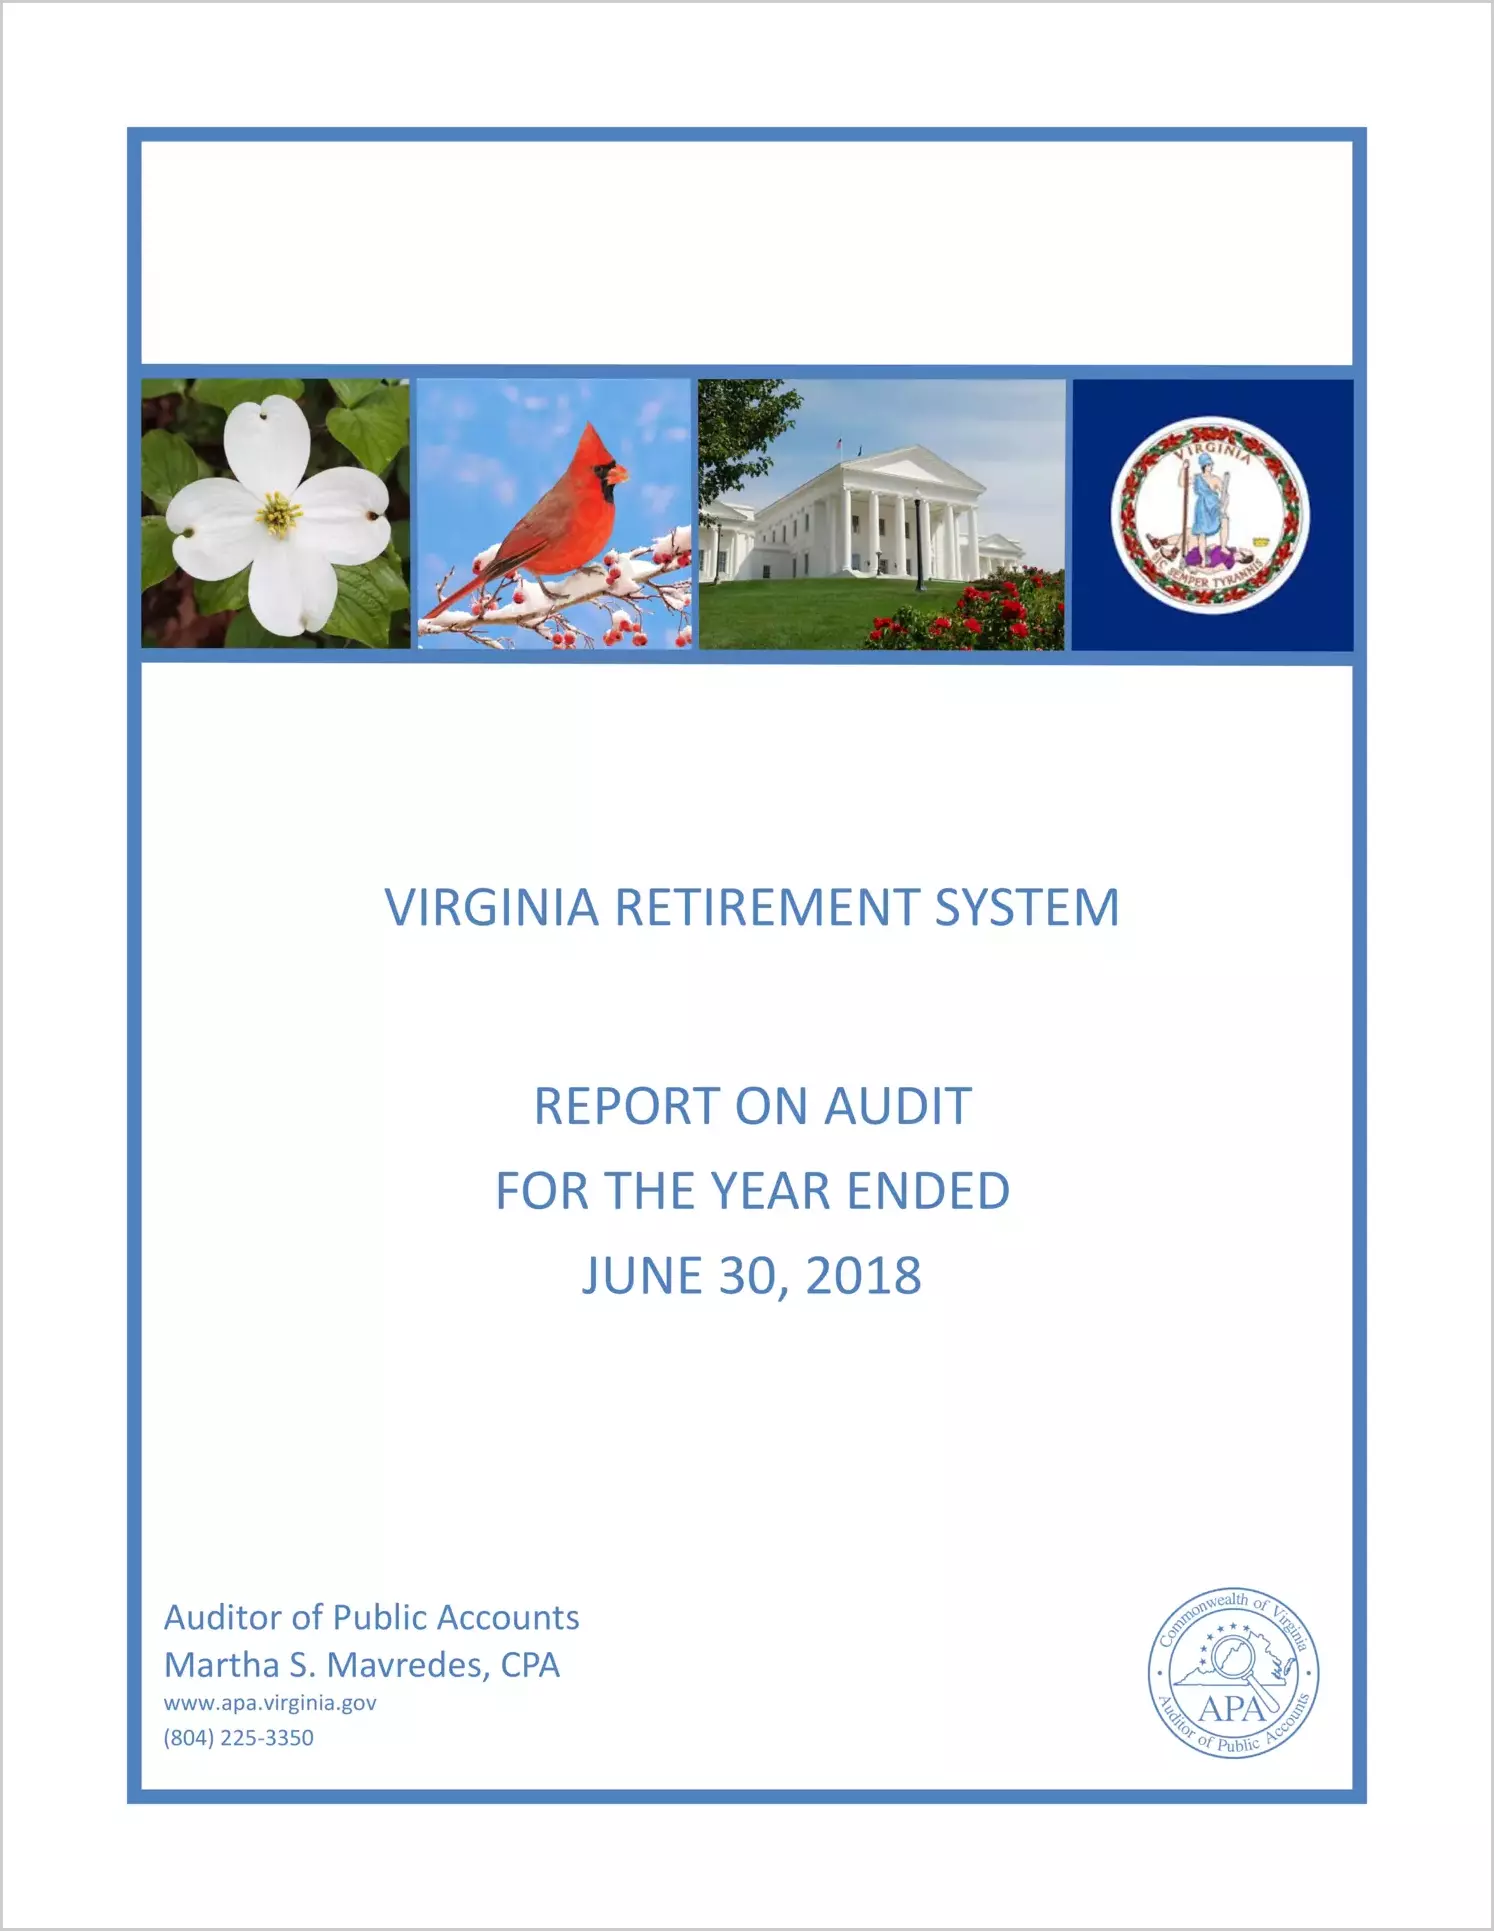 Virginia Retirement System for the year ended June 30, 2018